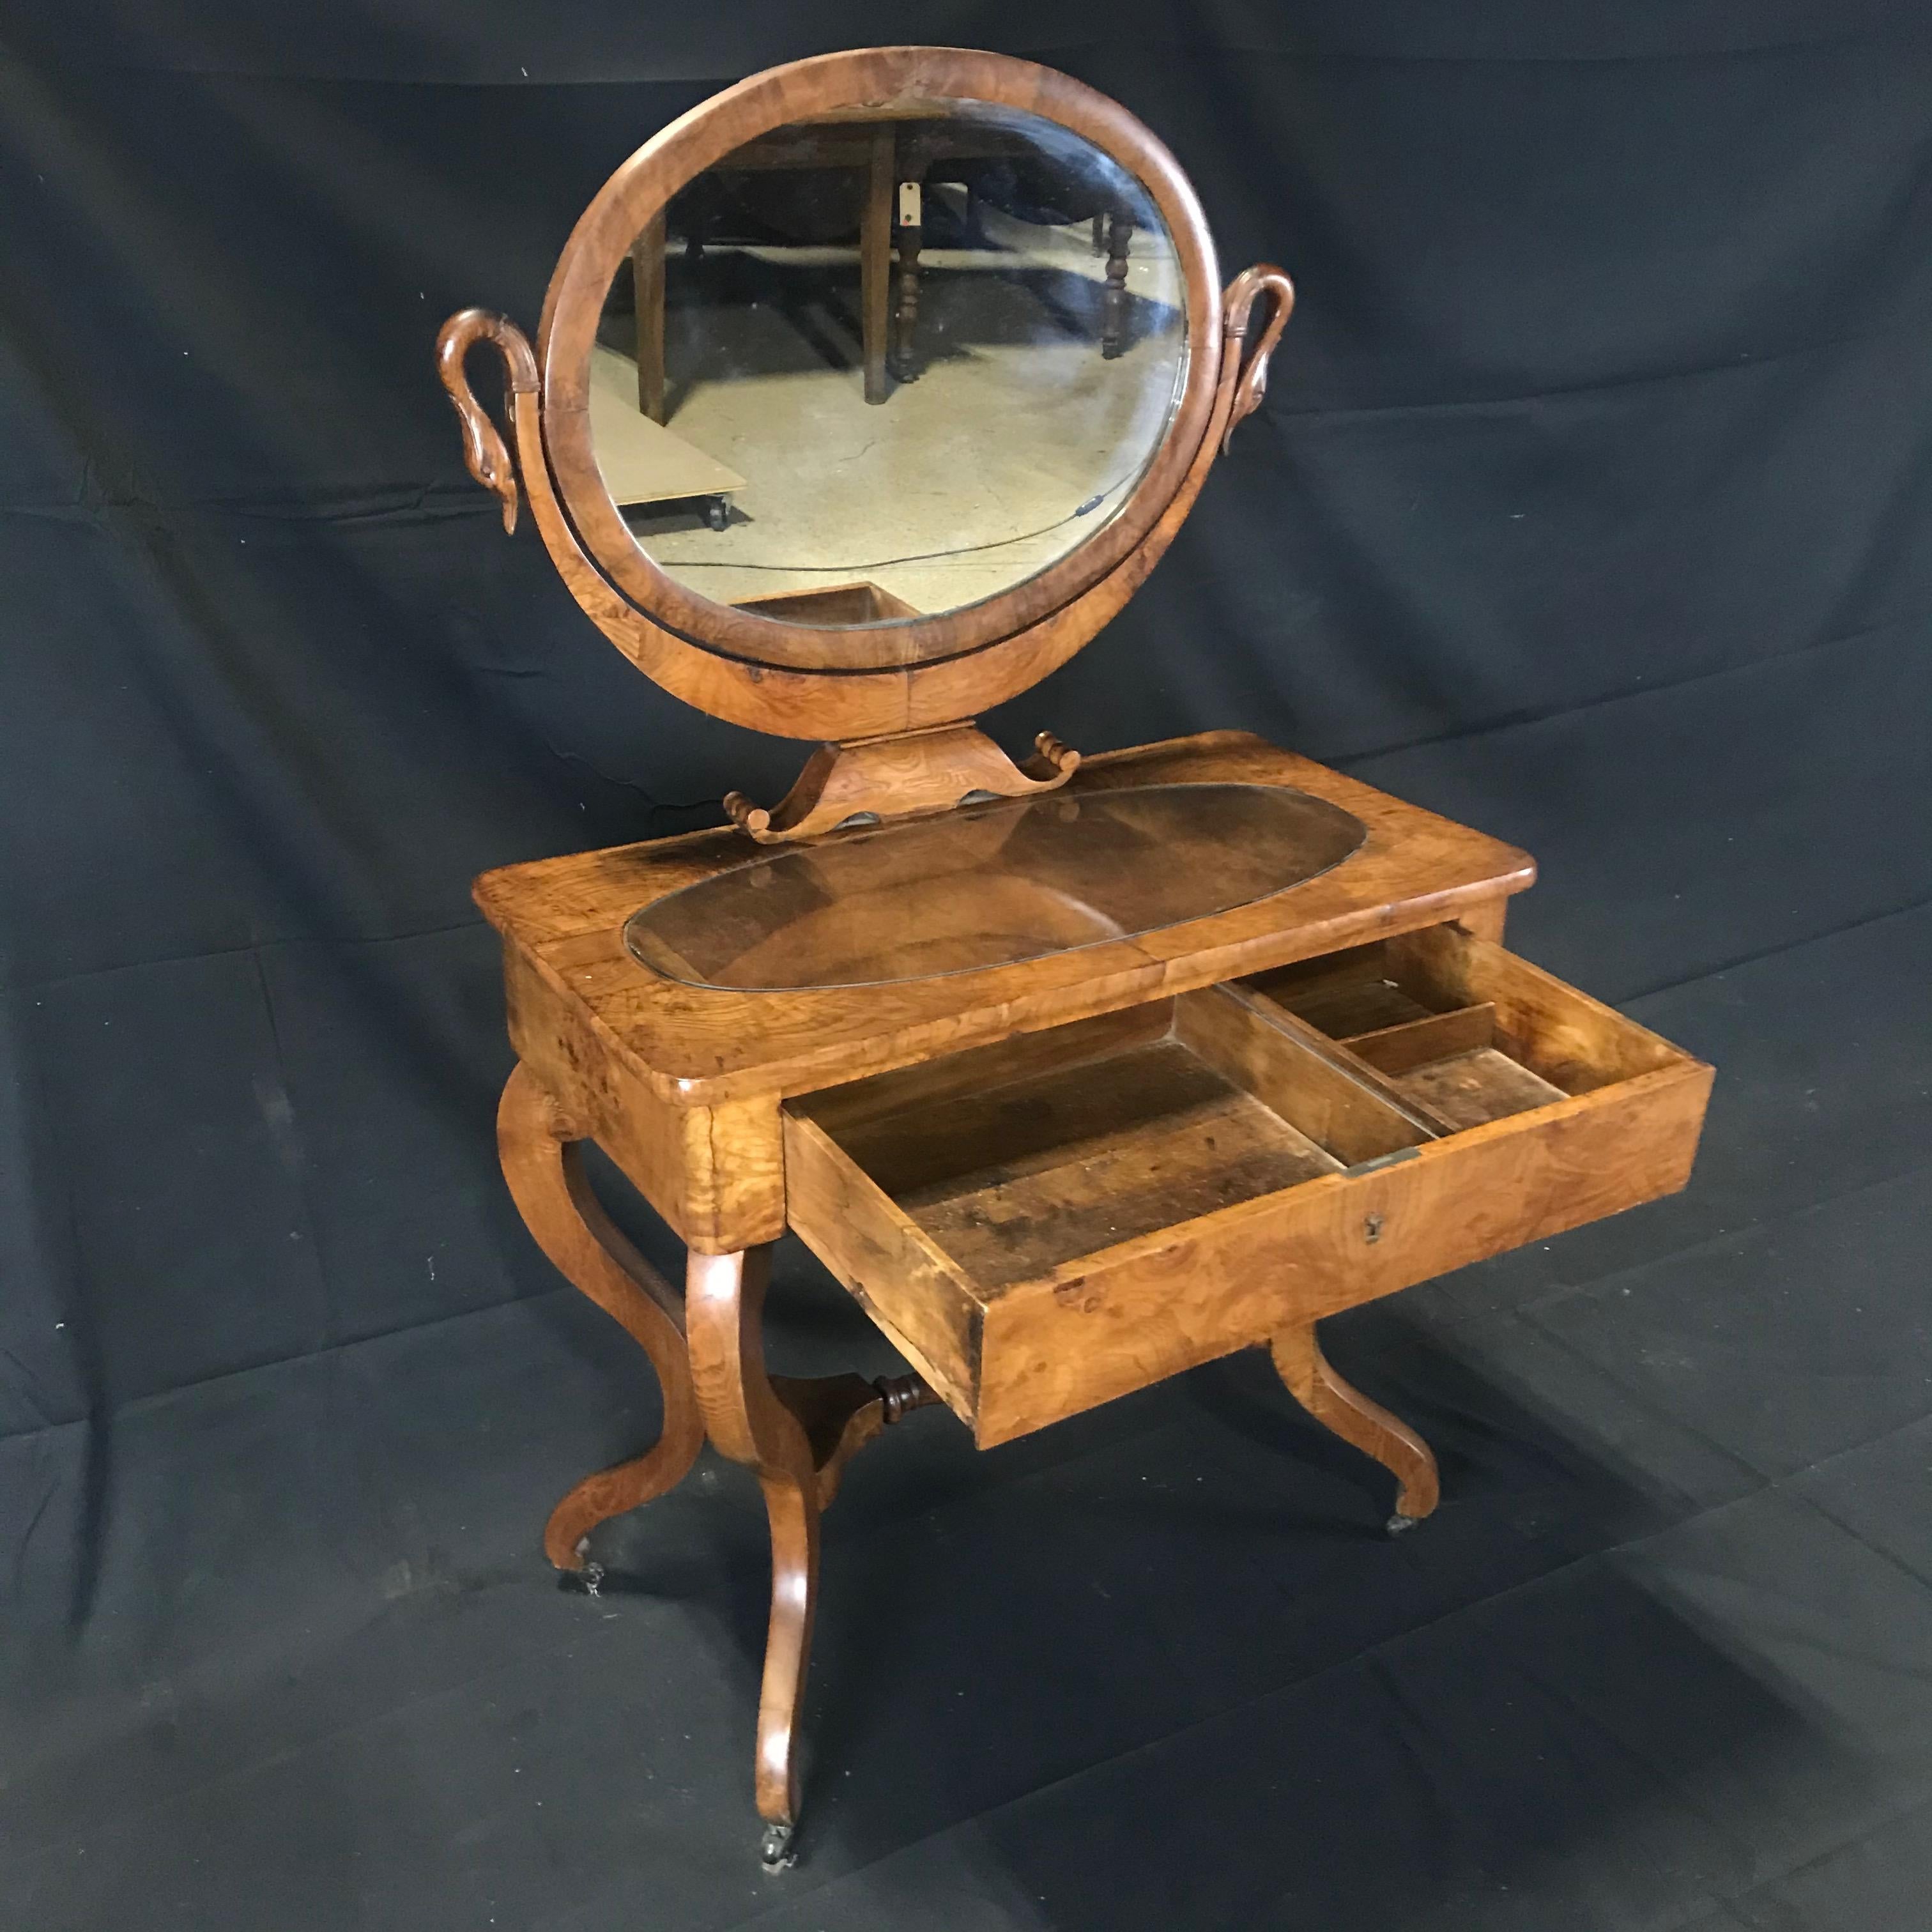 Beautiful French dressing table with mirror in carved walnut with elegant swan neck support uprights. On the sides the mirror is supported by two arms carved in the wood in the shape of a swan. Under the mirror a handy drawer for storing toiletries